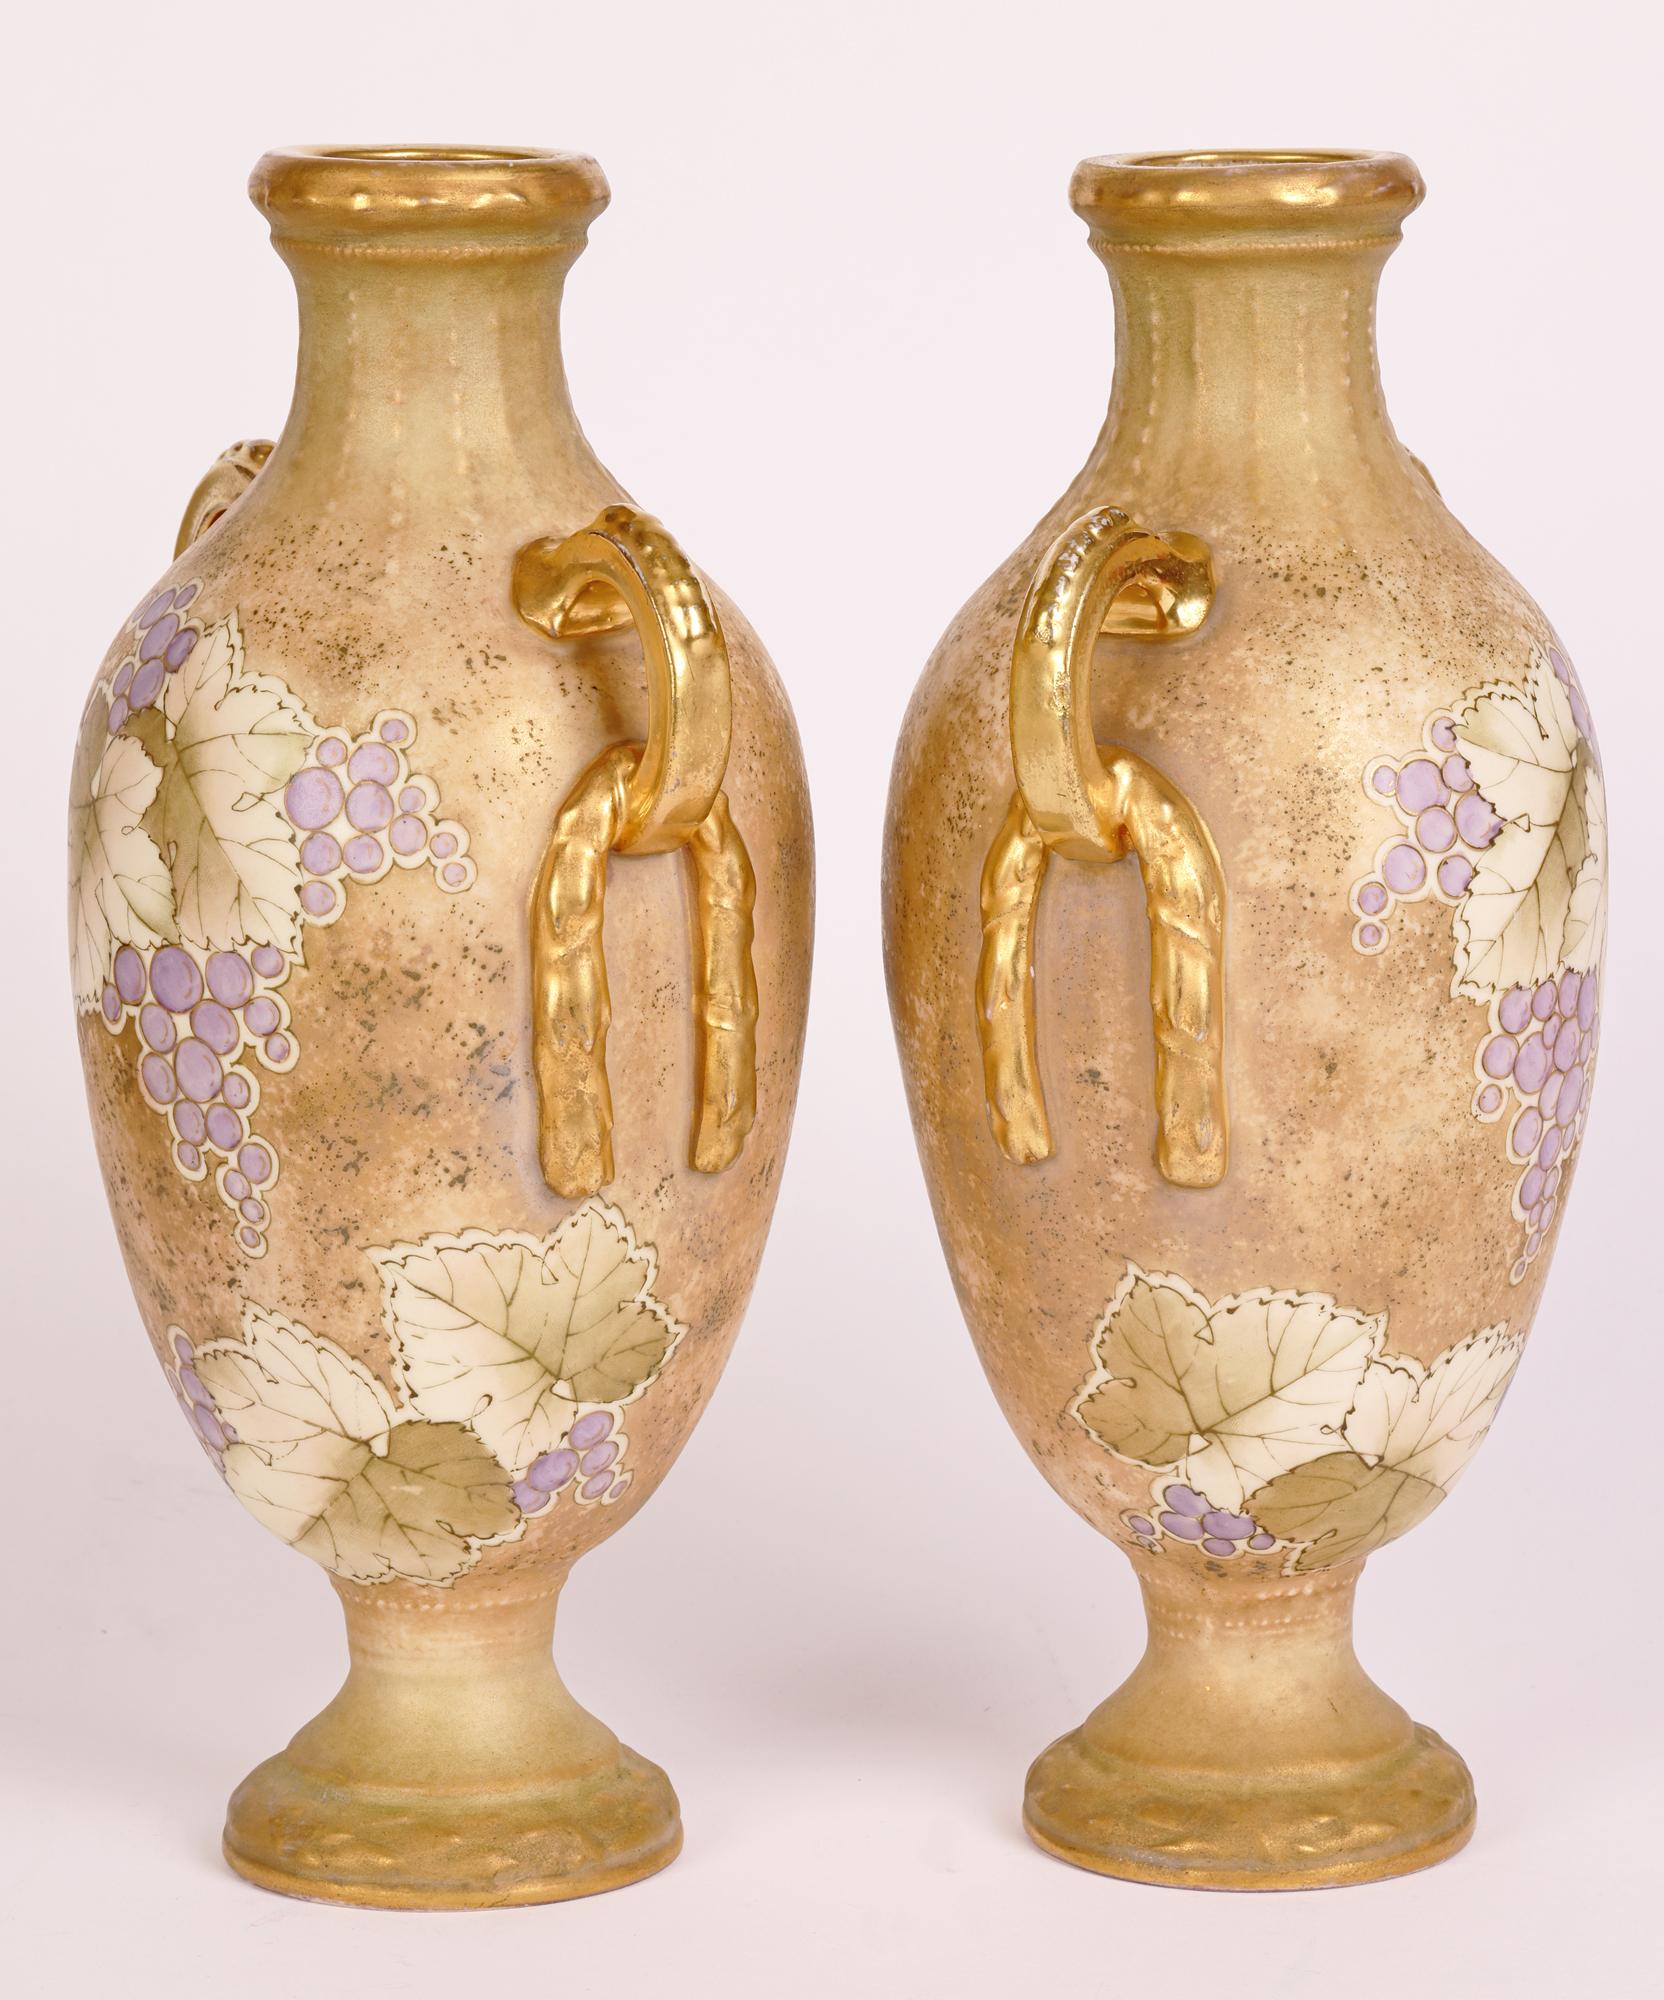 Turn Teplitz RSK Amphora Pair Art Nouveau Hand-Painted Twin Handled Vases For Sale 9